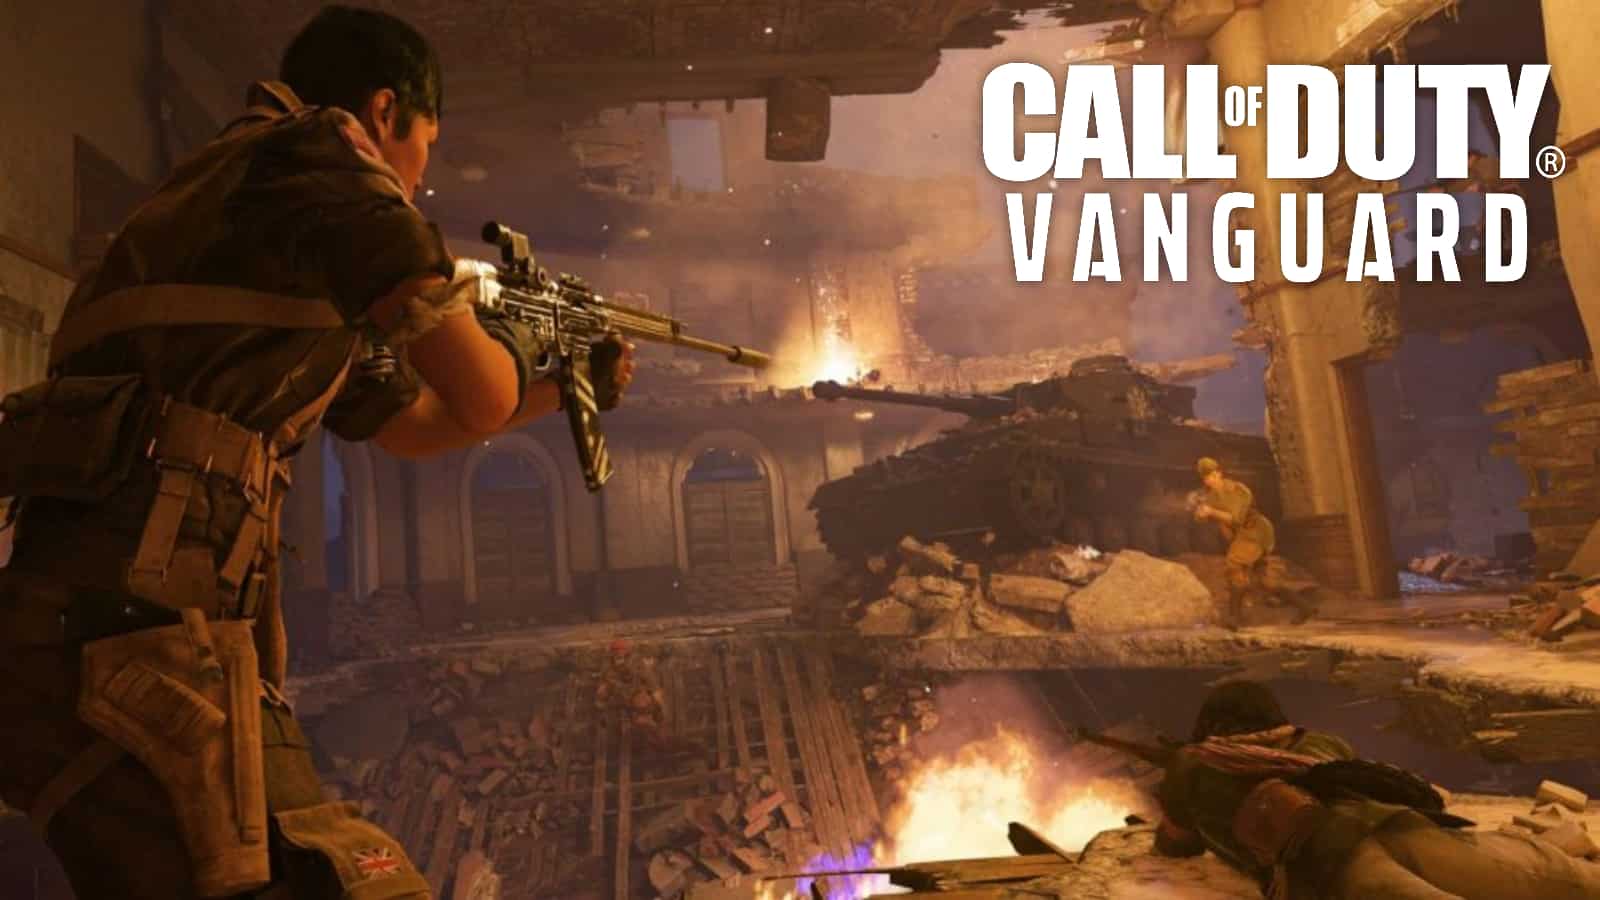 Call of Duty Vanguard players demand scoreboard changes: "how have we gone backwards?"